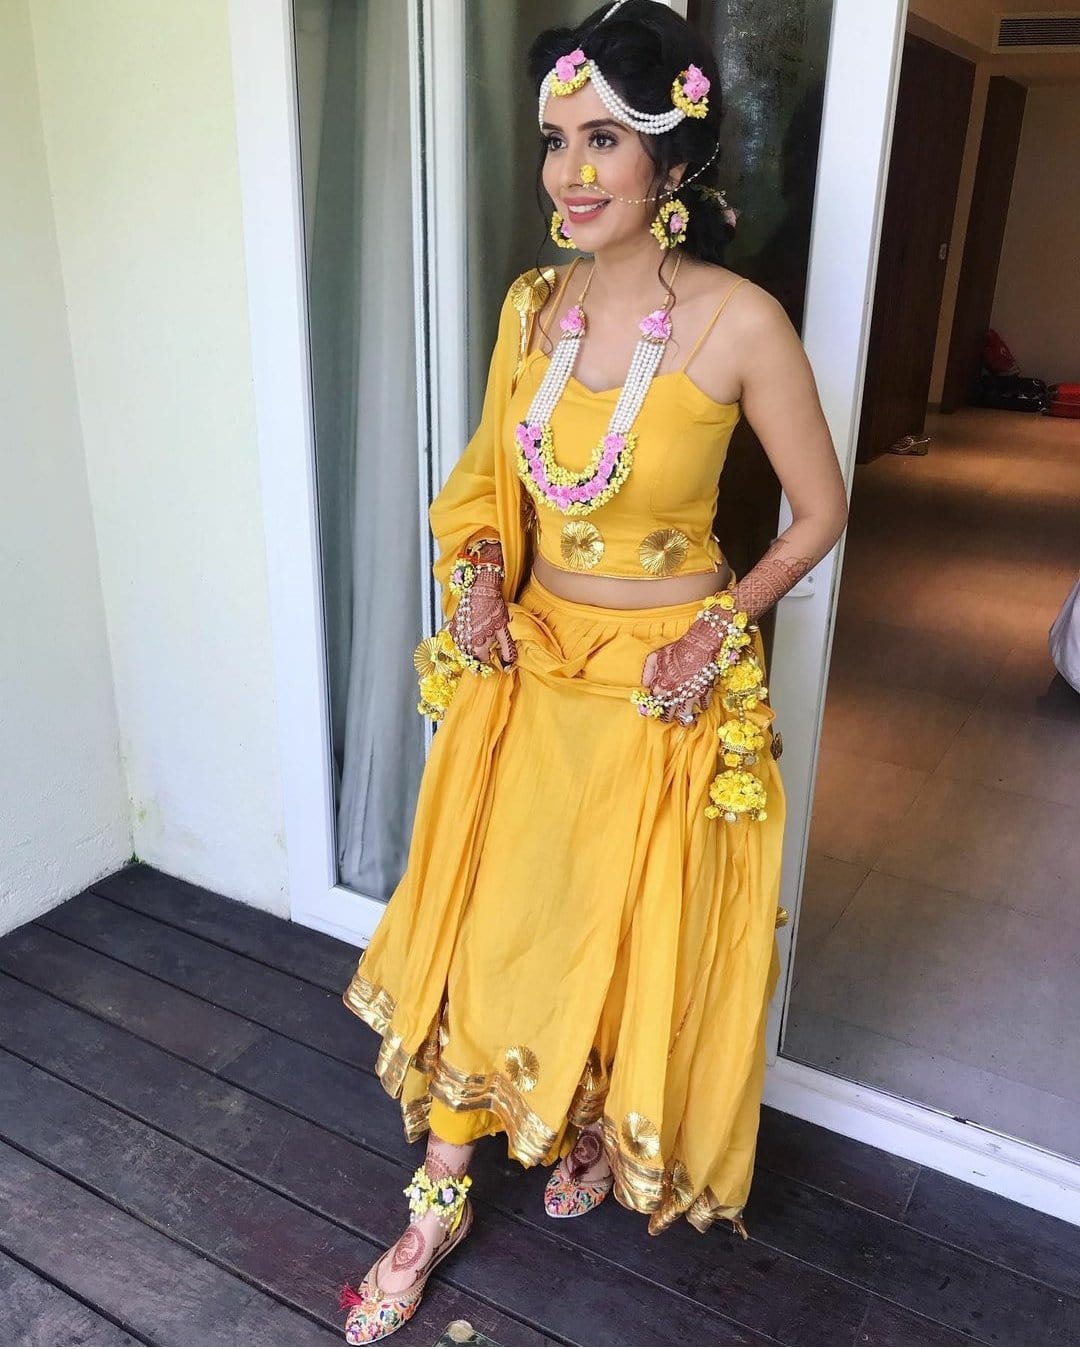 Lamansh Flower🌺🌻🌹🌷 jewellery 1 Necklace , 2 Earrings , 1 Maangtika with side chain, 2 Hathphools , 2 Anklets Payal & 1 Nath Nose ring / Pink Yellow Charu Asopa Sen